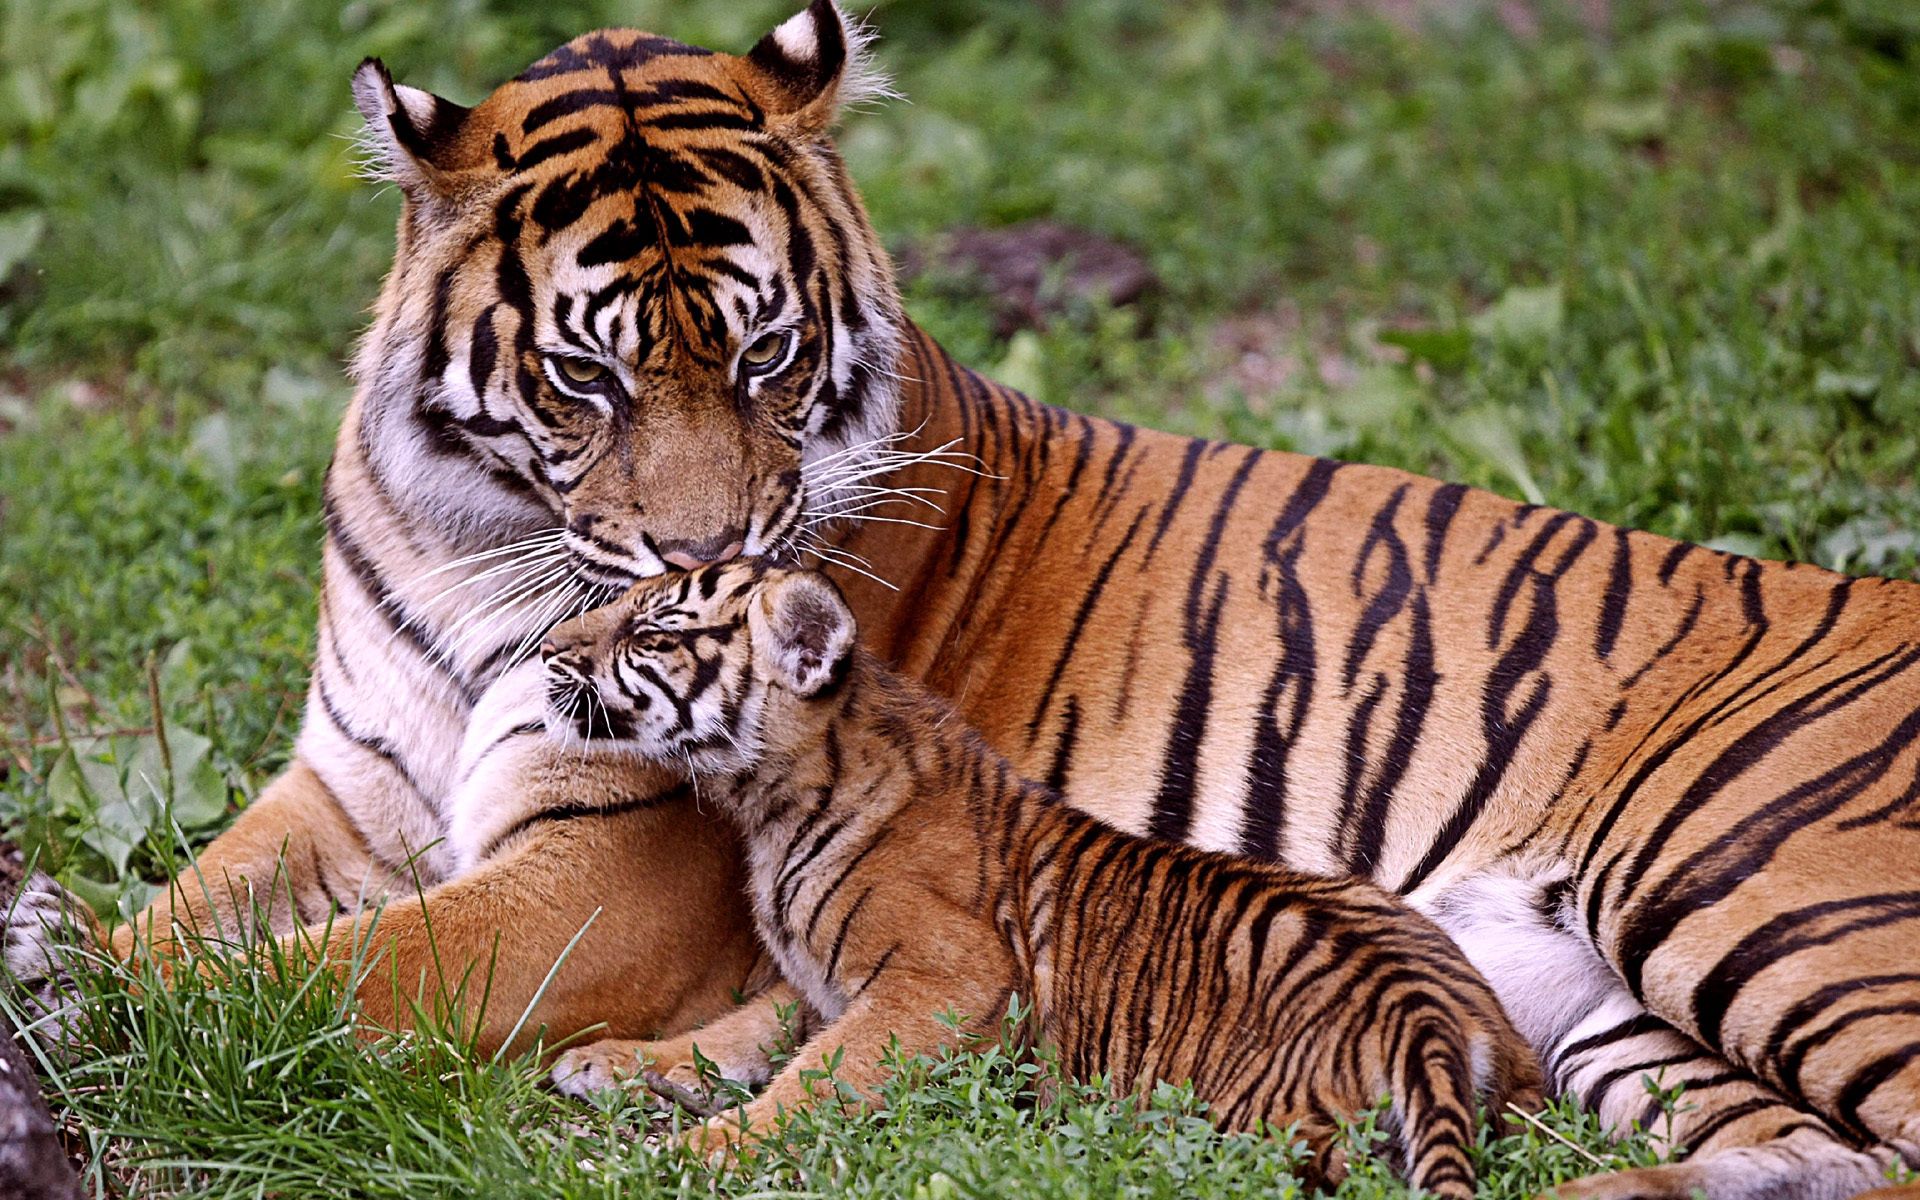 care, grass, young, animals, to lie down, lie, tiger, joey, tiger cub Full HD